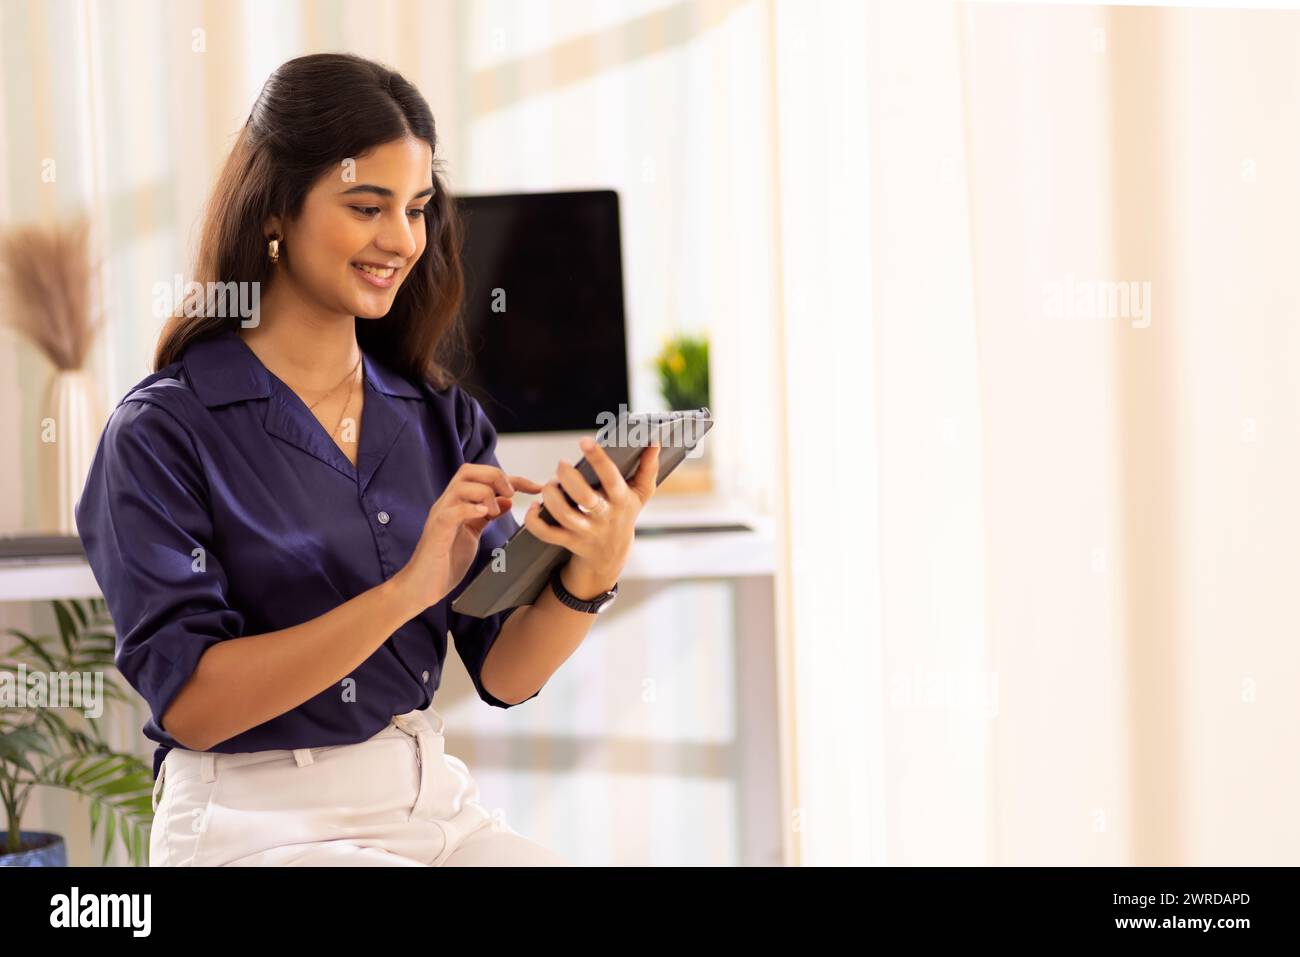 Portrait of young businesswoman using digital tablet in office Banque D'Images